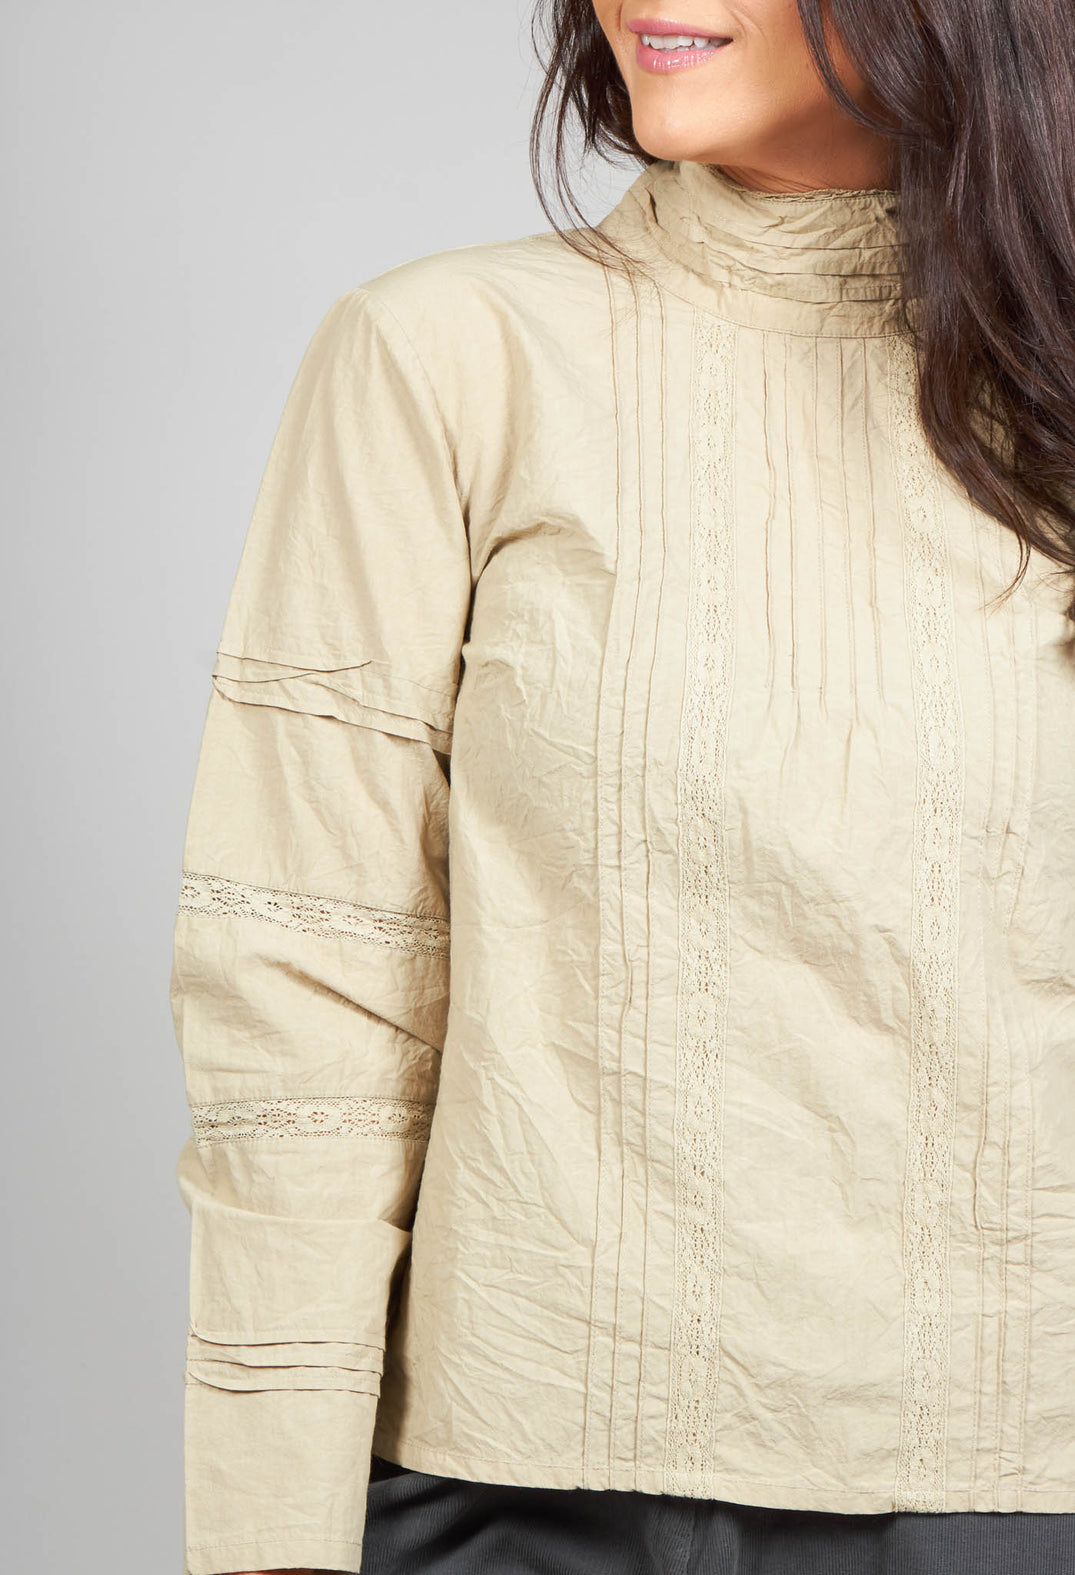 Long Sleeved Blouse with High Collar and Lace Details in Khaki